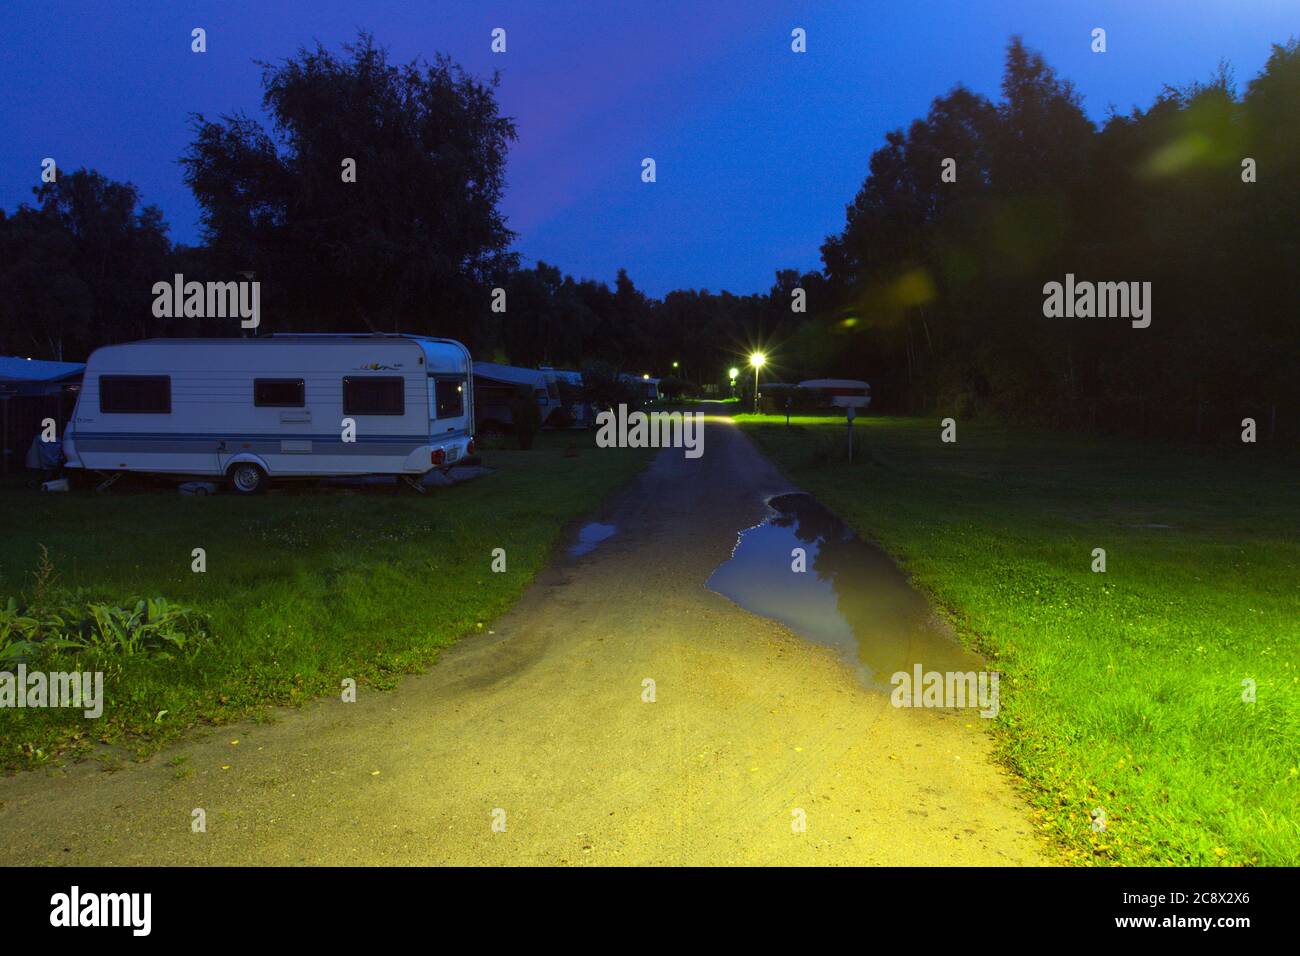 FALSTERBO, SWEDEN ON SEPTEMBER 05, 2011. Late arrive to a campsite. Driveway, main light and caravans. Editorial use. Stock Photo